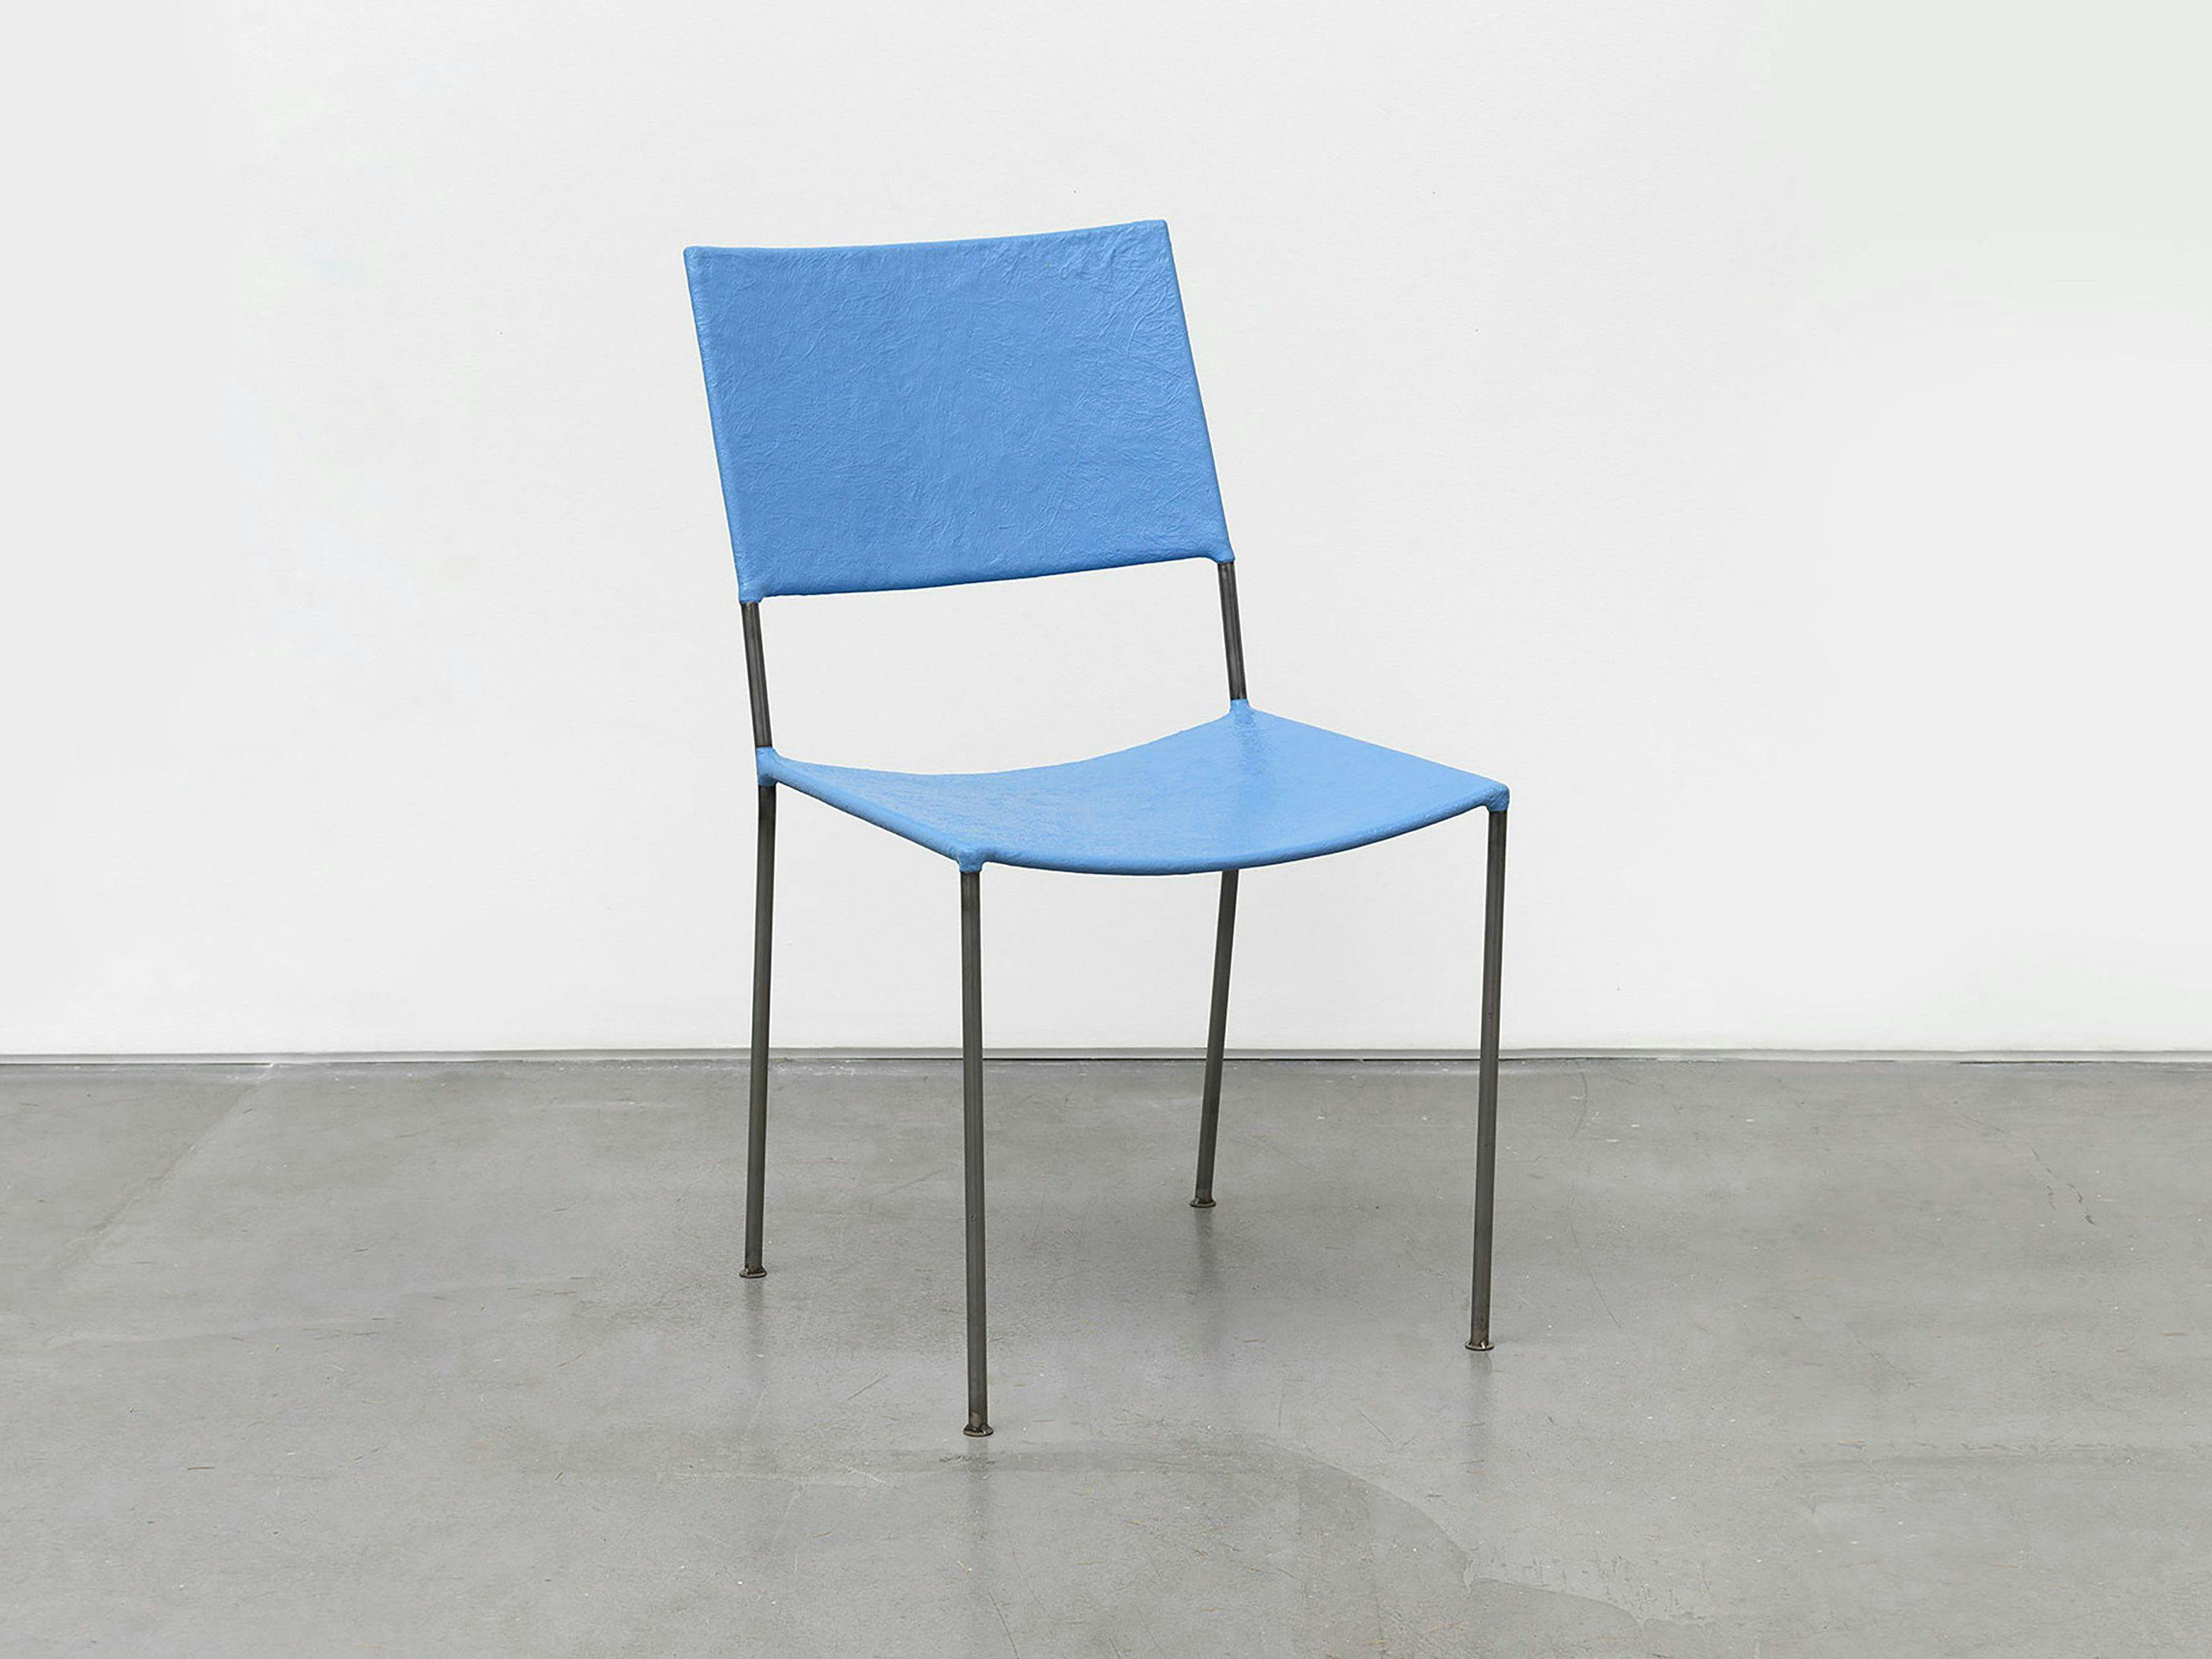 A furniture work by Franz West, titled Künstlerstuhl (Artist's Chair), dated in 2006 and 2022.